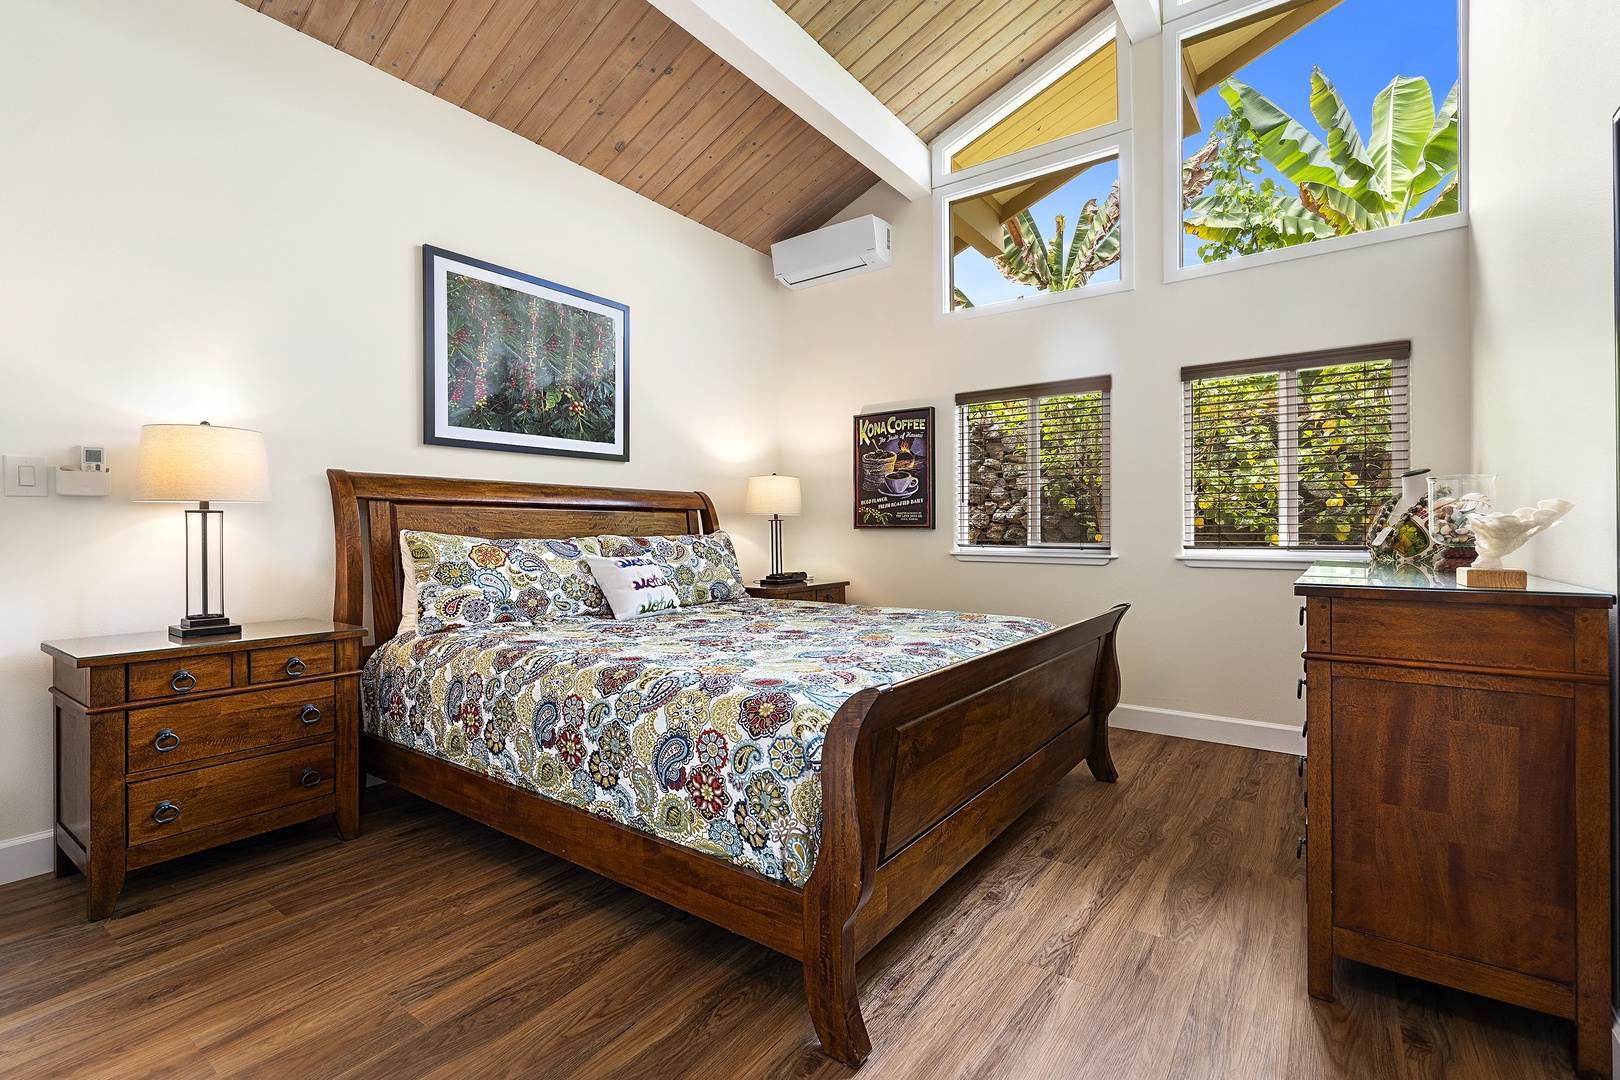 Kailua Kona Vacation Rentals, Hale Pua - Kona Coffee Suite equipped with King bed, A/C, and ensuite